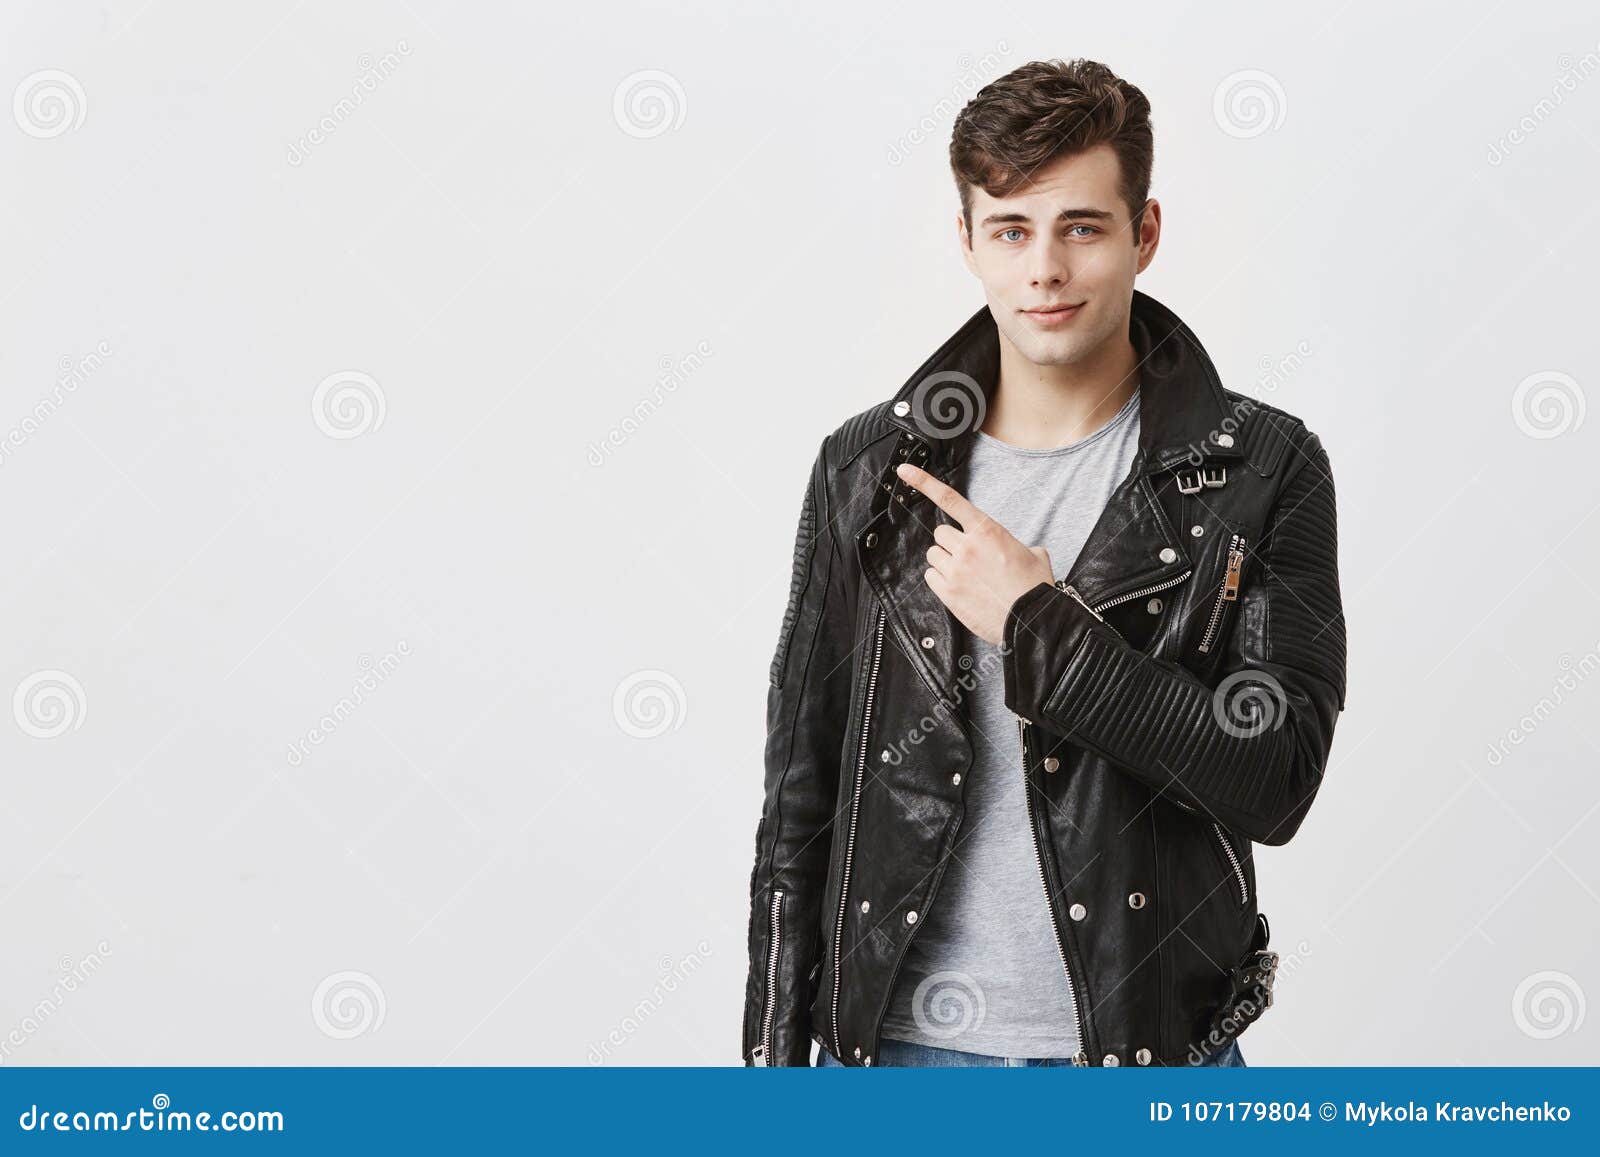 guy smiling gently in black leather jacket indicates with fore finger at copy space for advertisment or promotional text